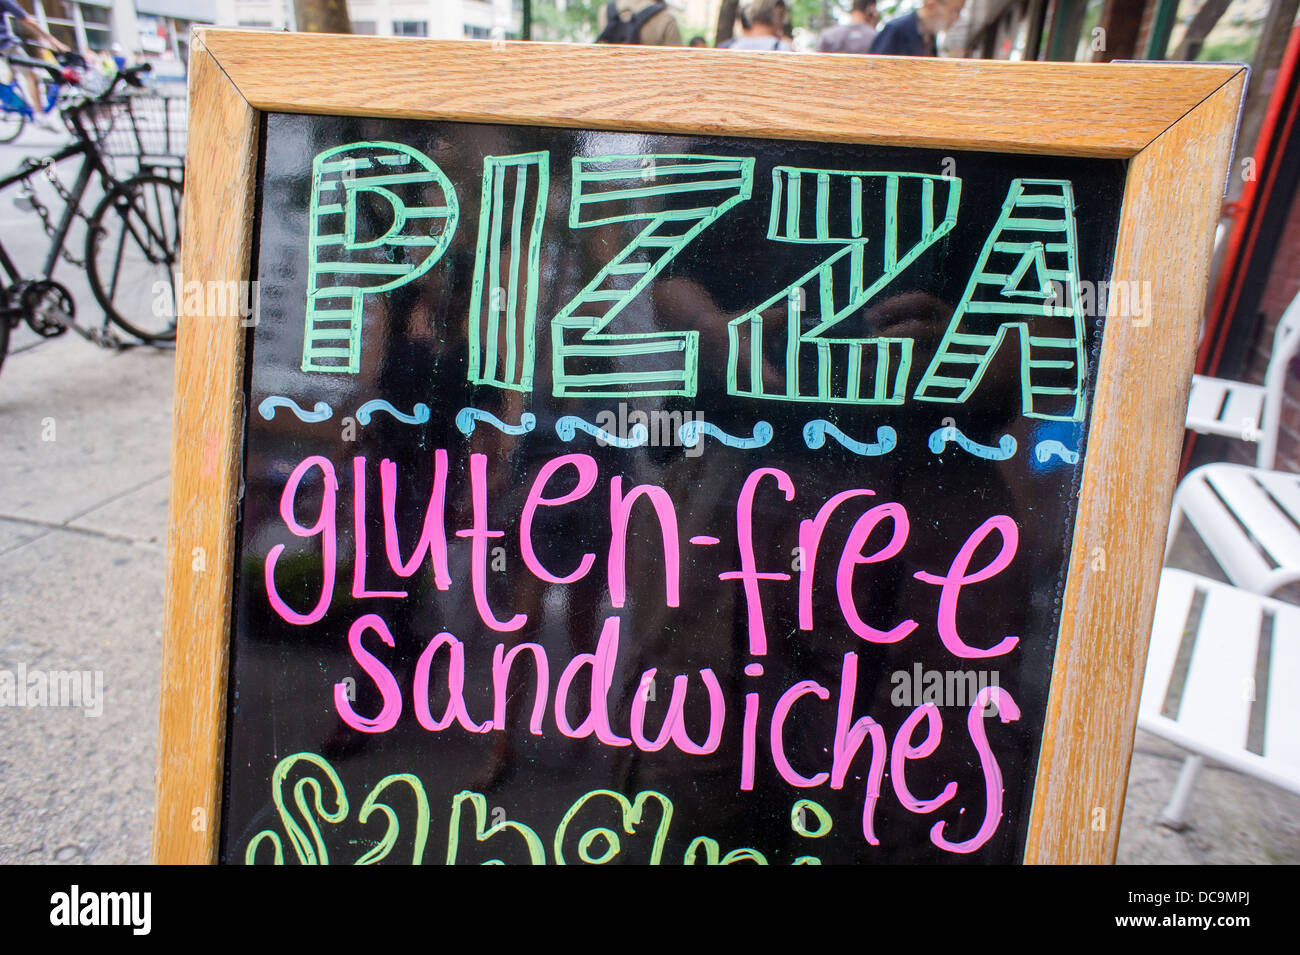 A sign outside of a restaurant in New York on Saturday, August 10, 2013 promotes their pizza and gluten-free sandwich offerings Stock Photo